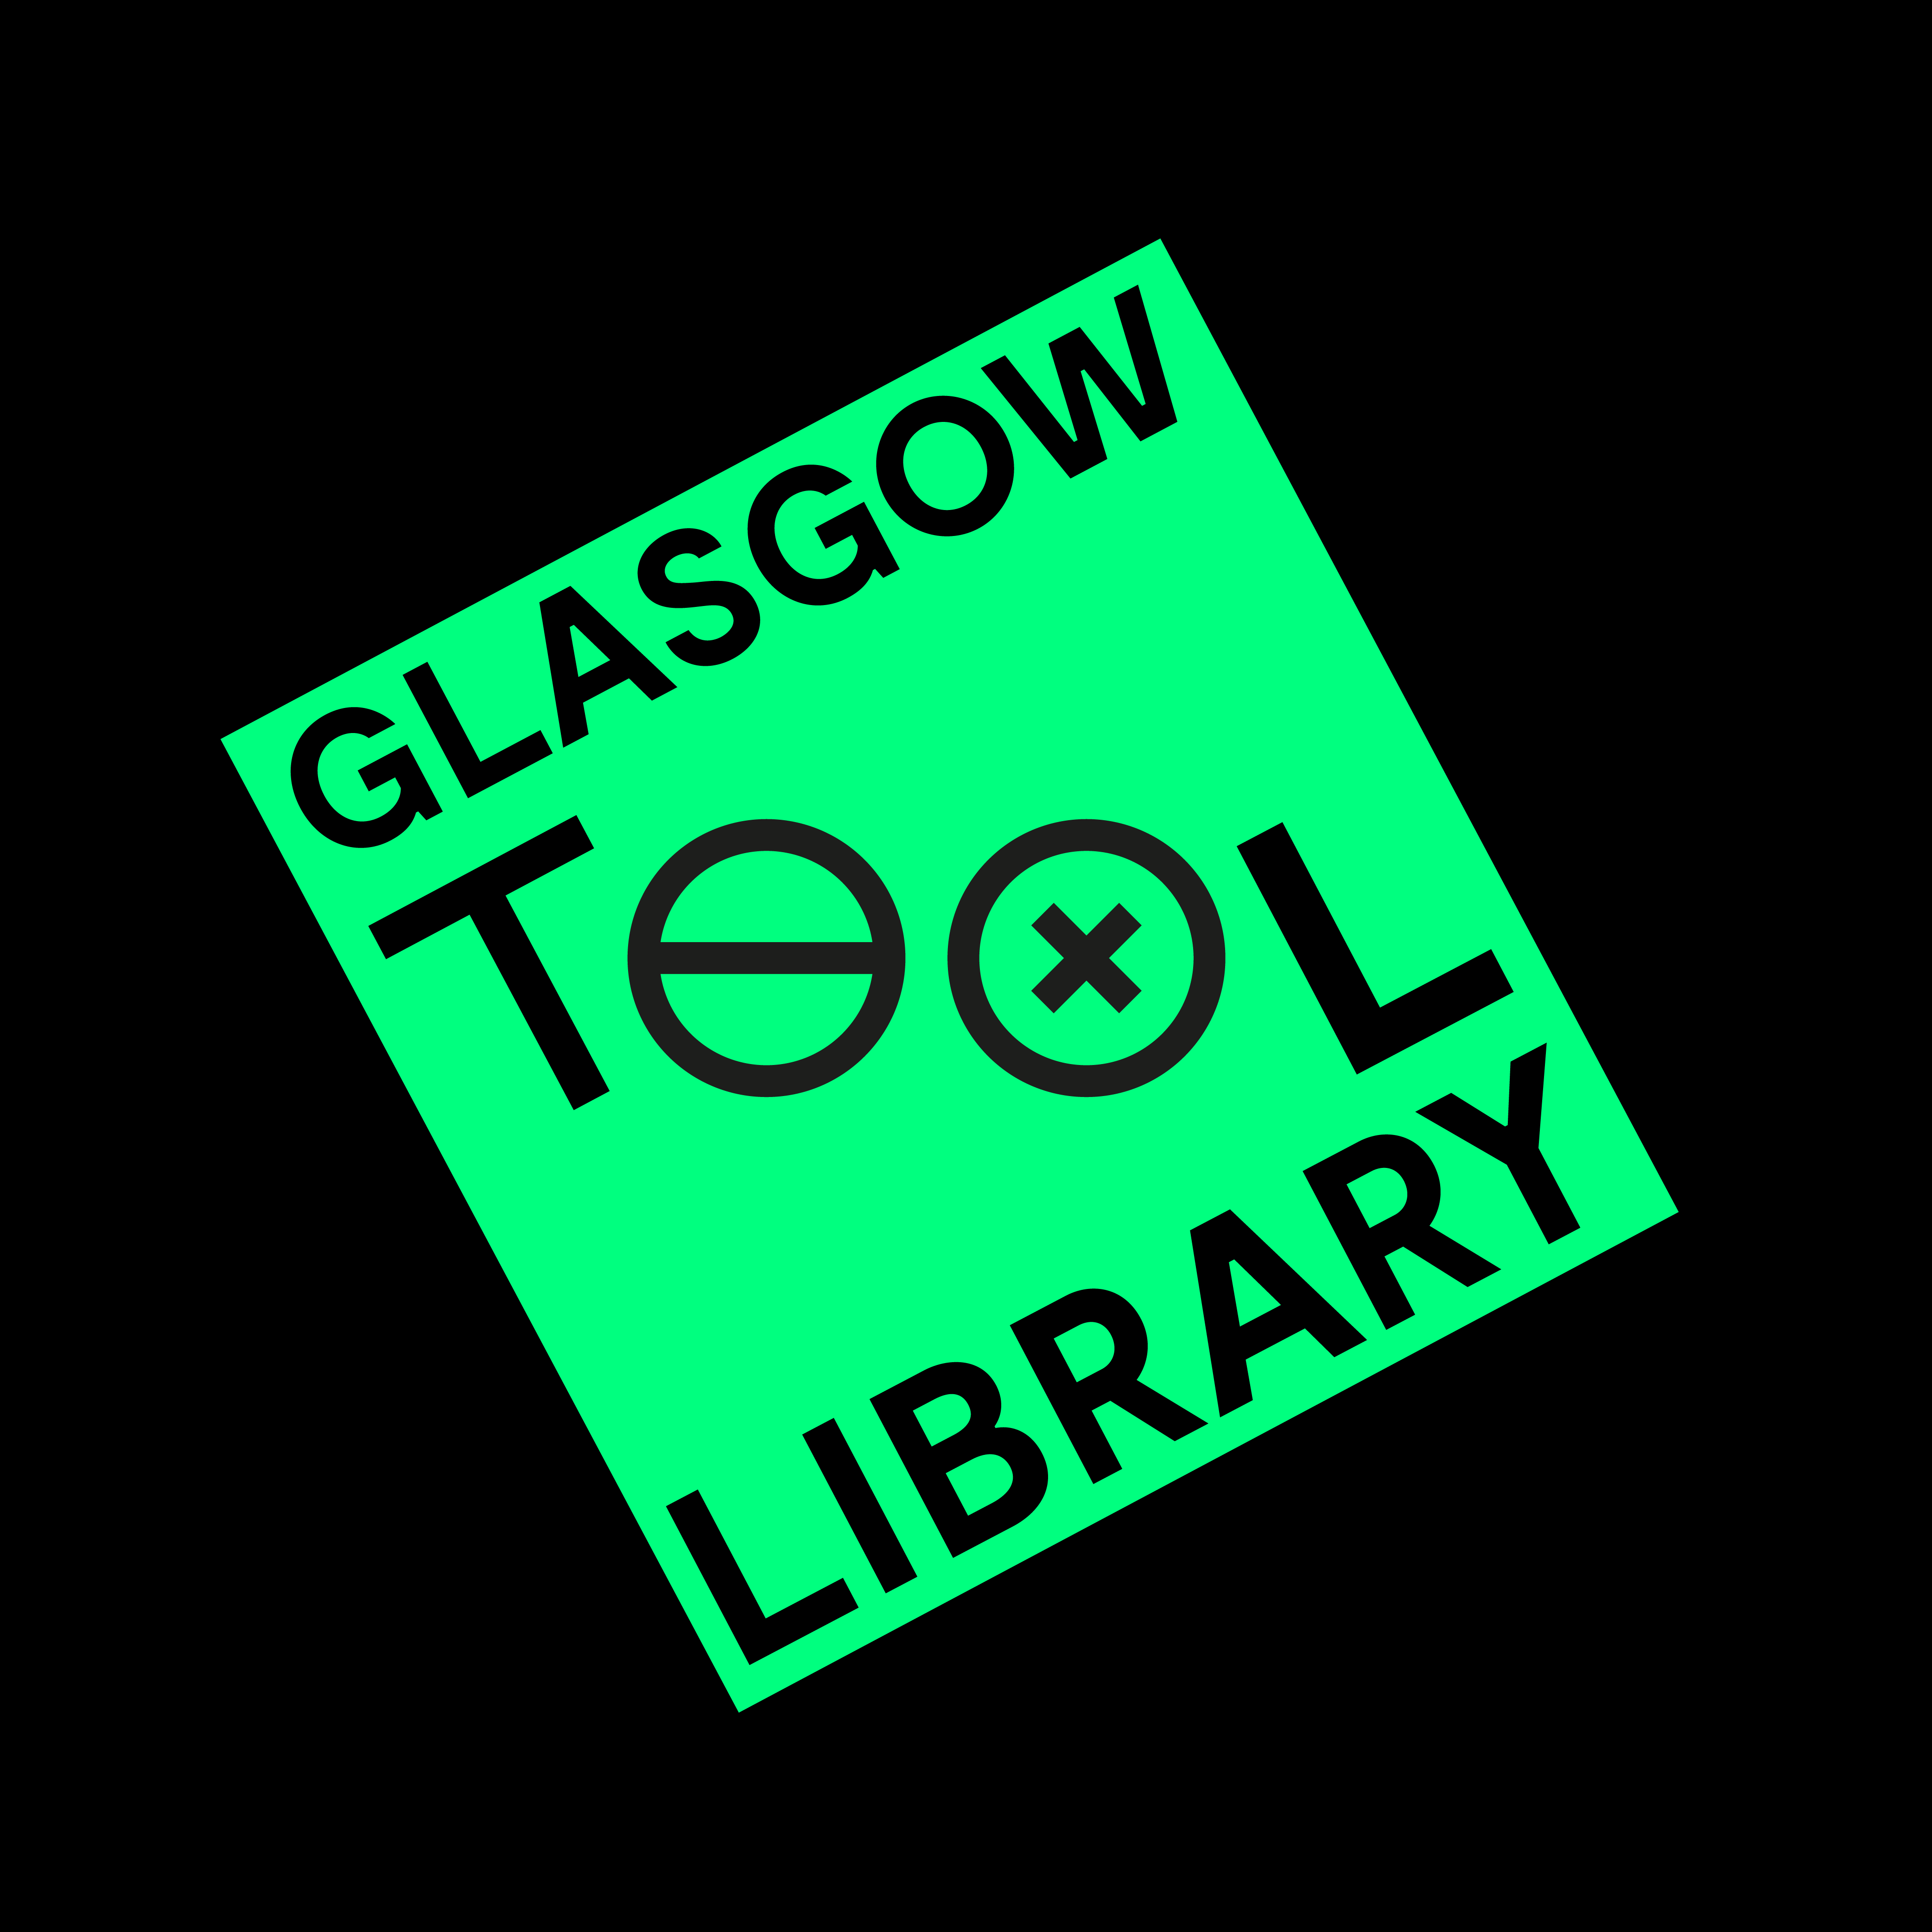 The Glasgow Tool Library